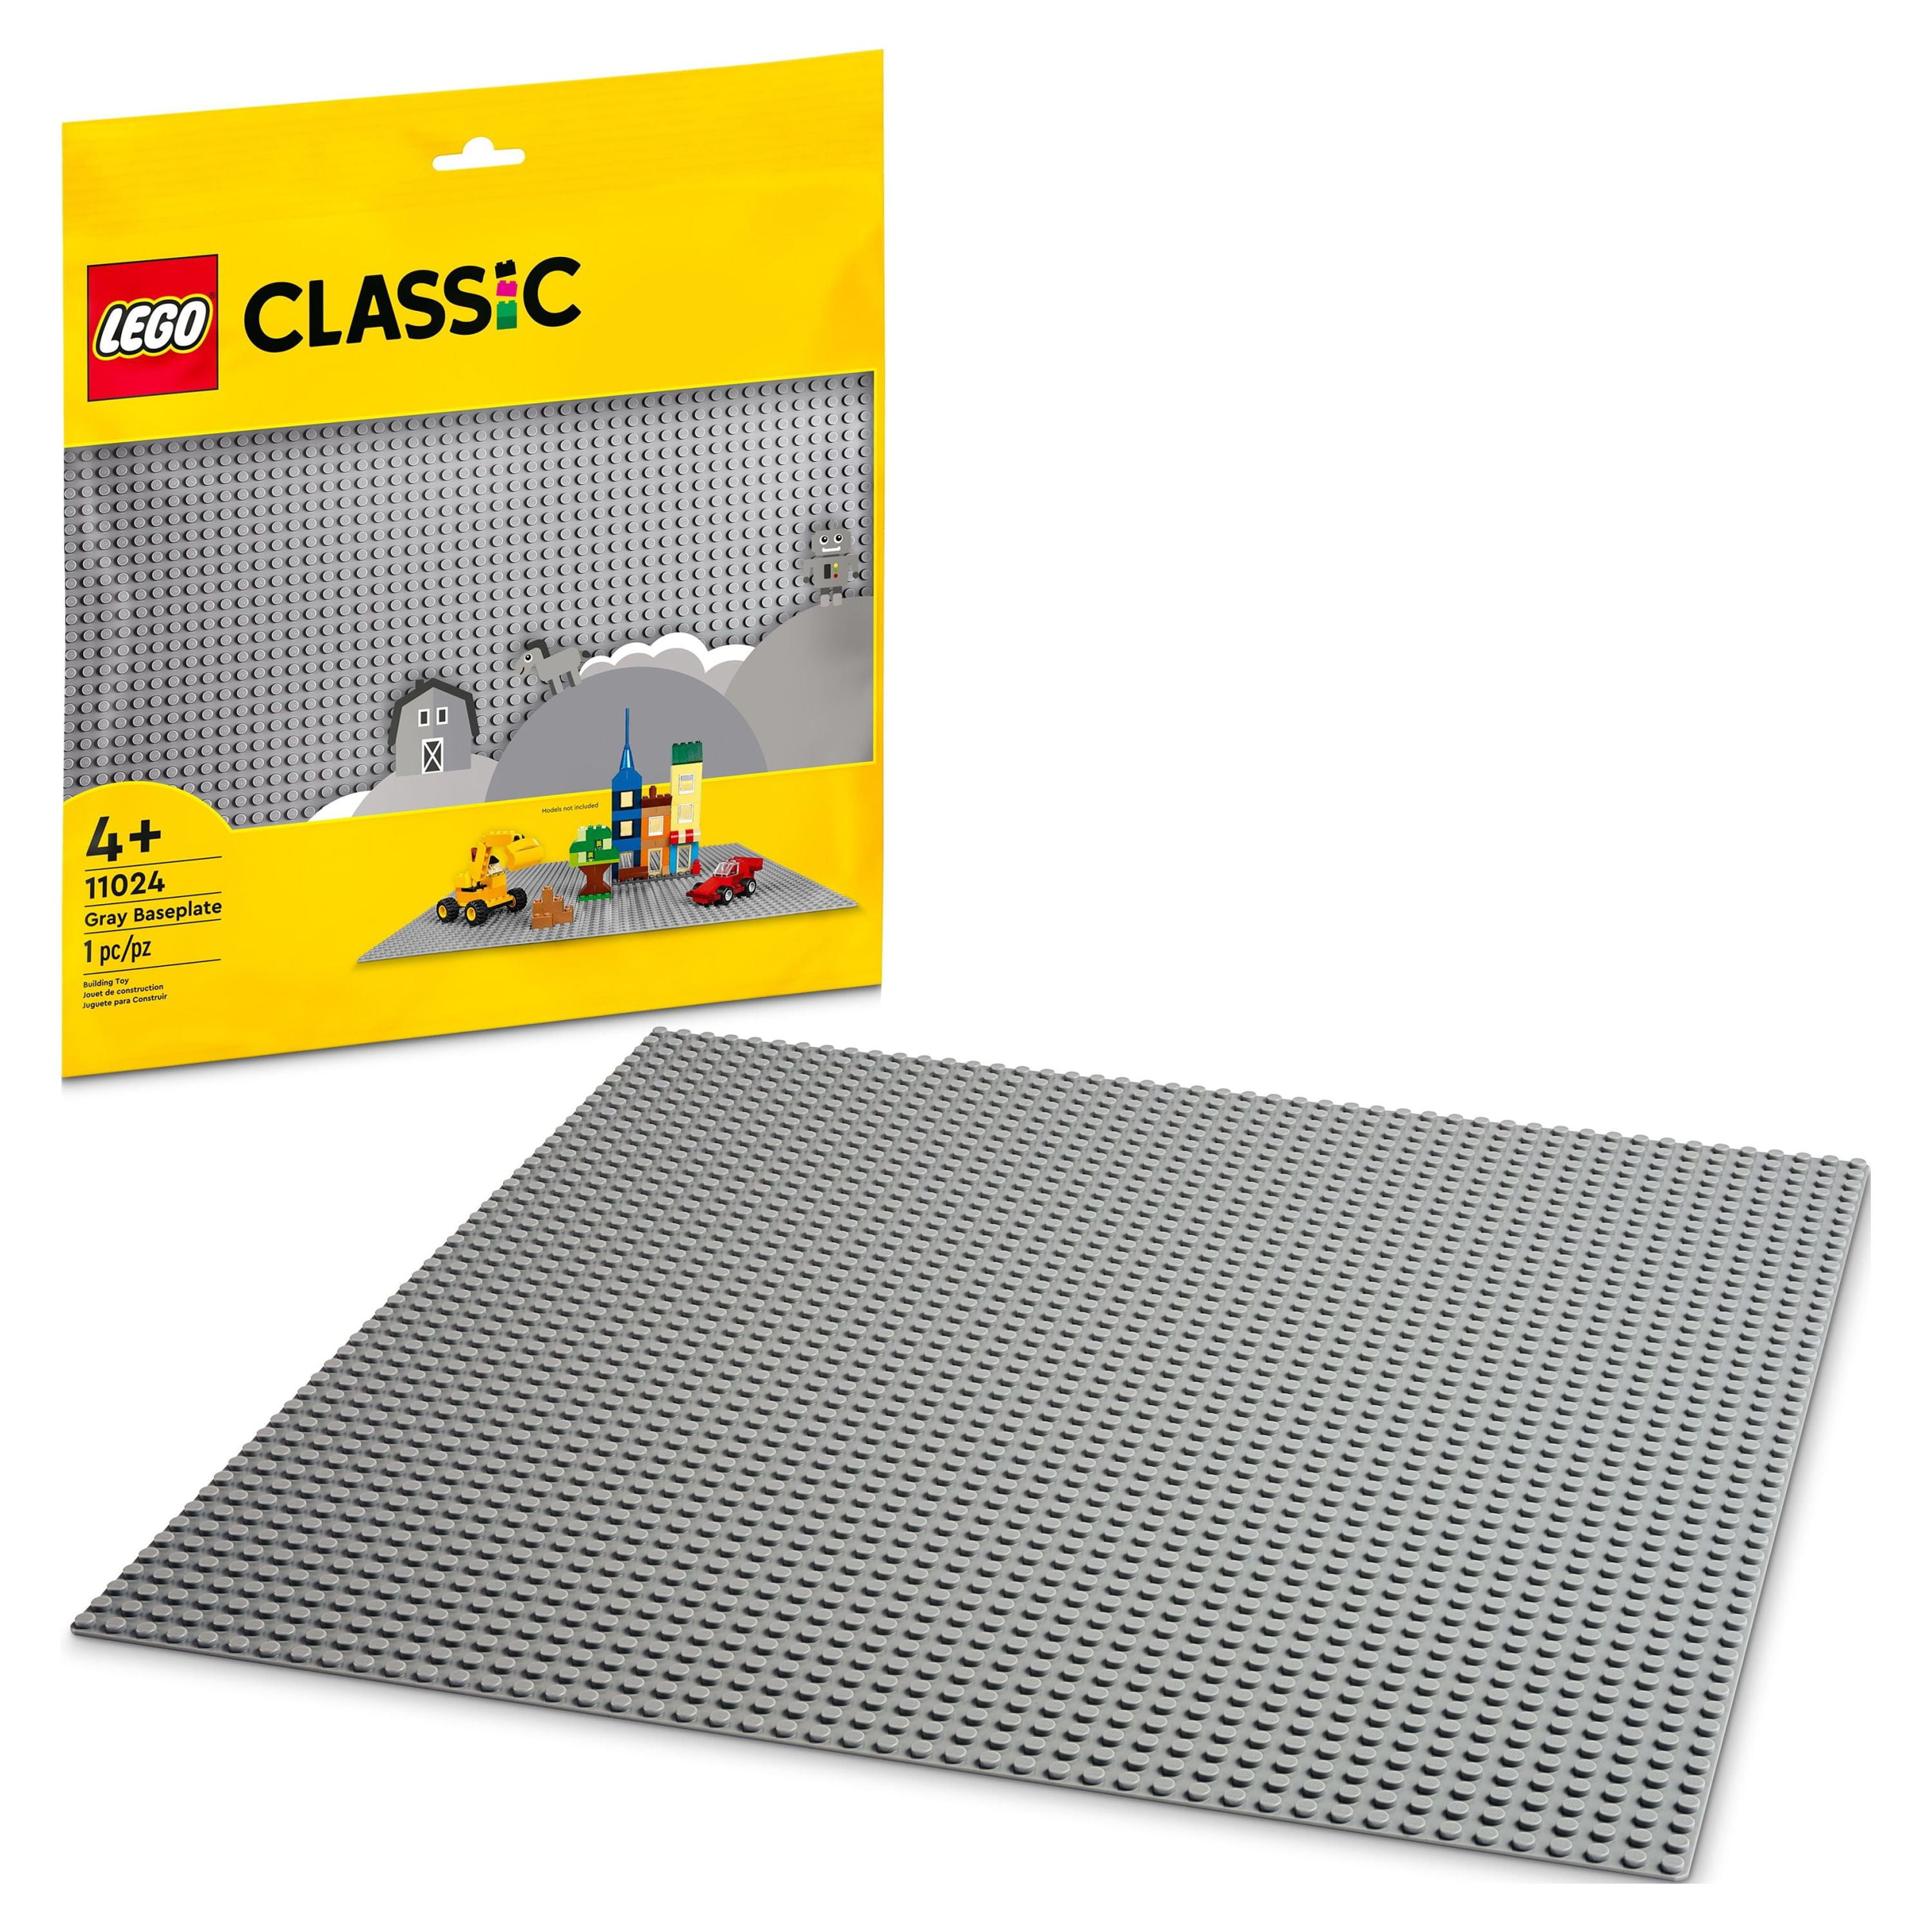 LEGO Classic Gray Baseplate Square 48x48 Stud Foundation to Build, Play,  and Display Brick Creations, Great for City Streets, Castle, and Mountain